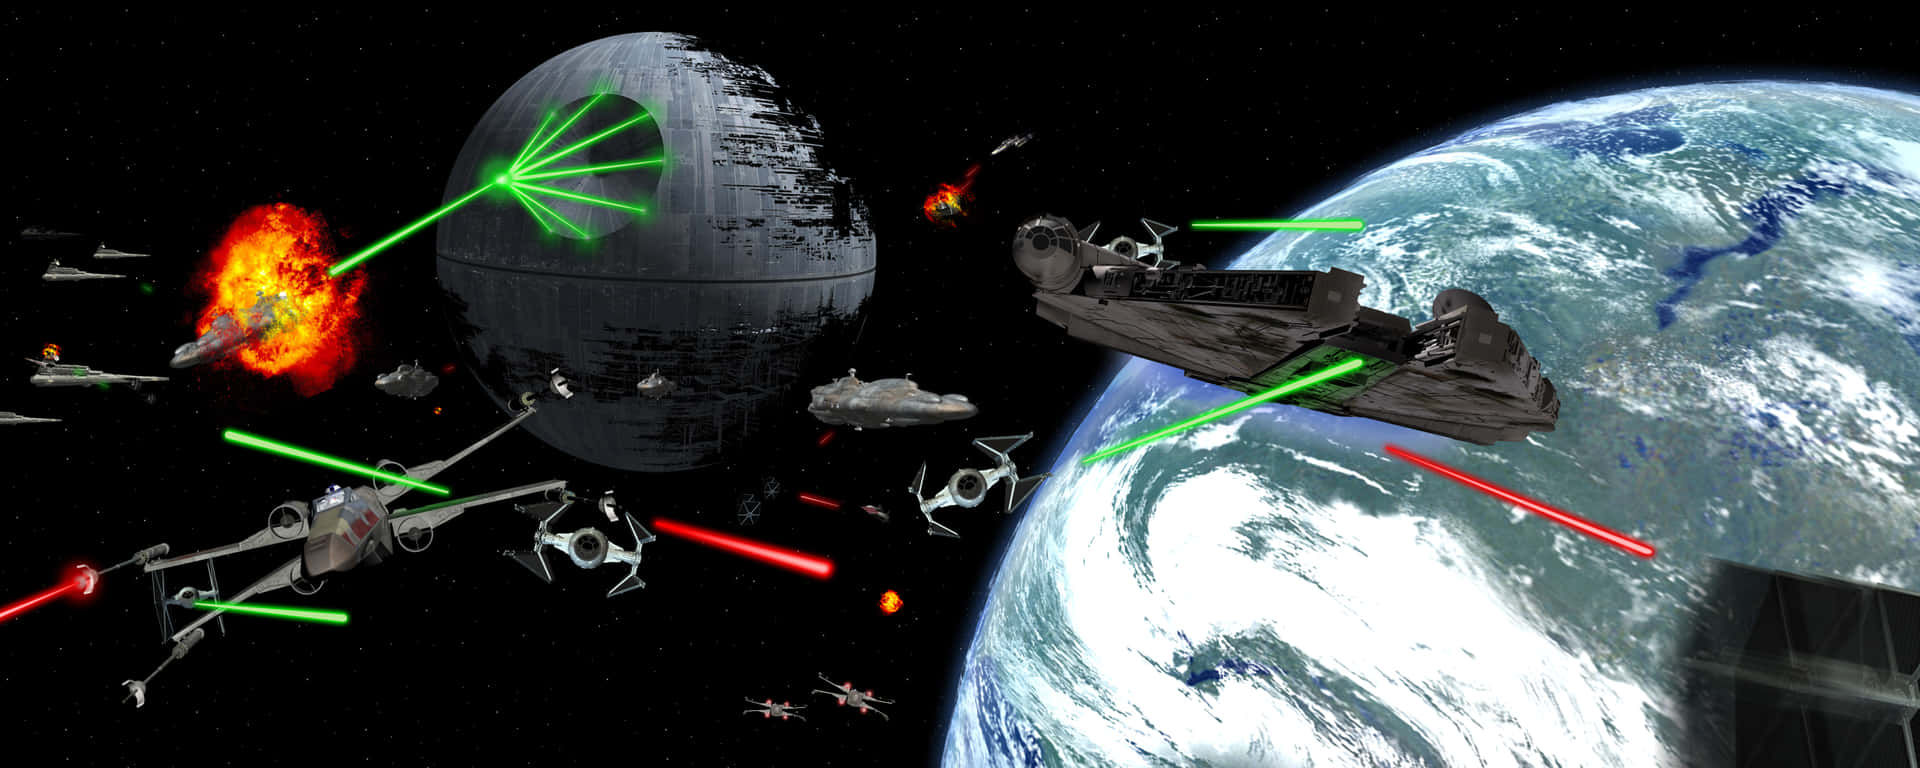 Imperial Shuttle Piloted By Darth Vader During The Battle Of Endor Wallpaper